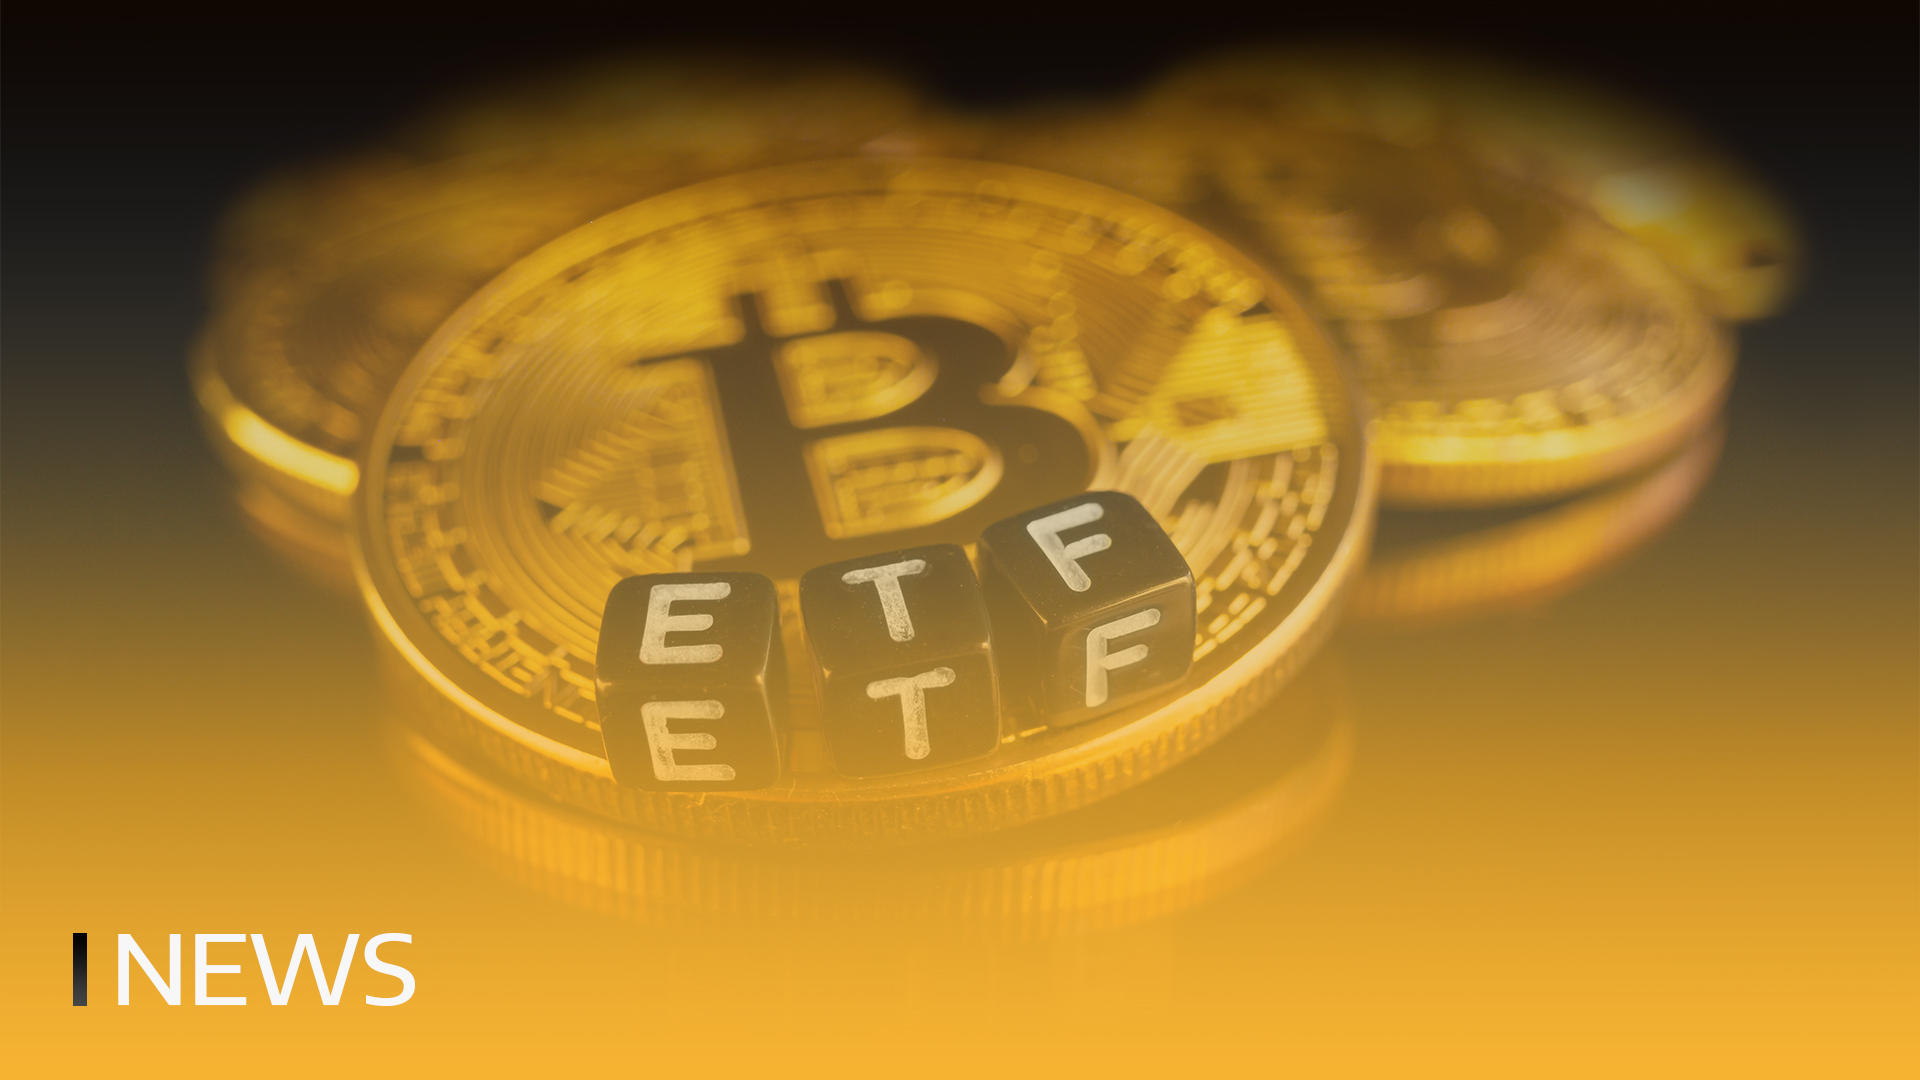 Bitcoin ETFs Are Set for Increased Activity